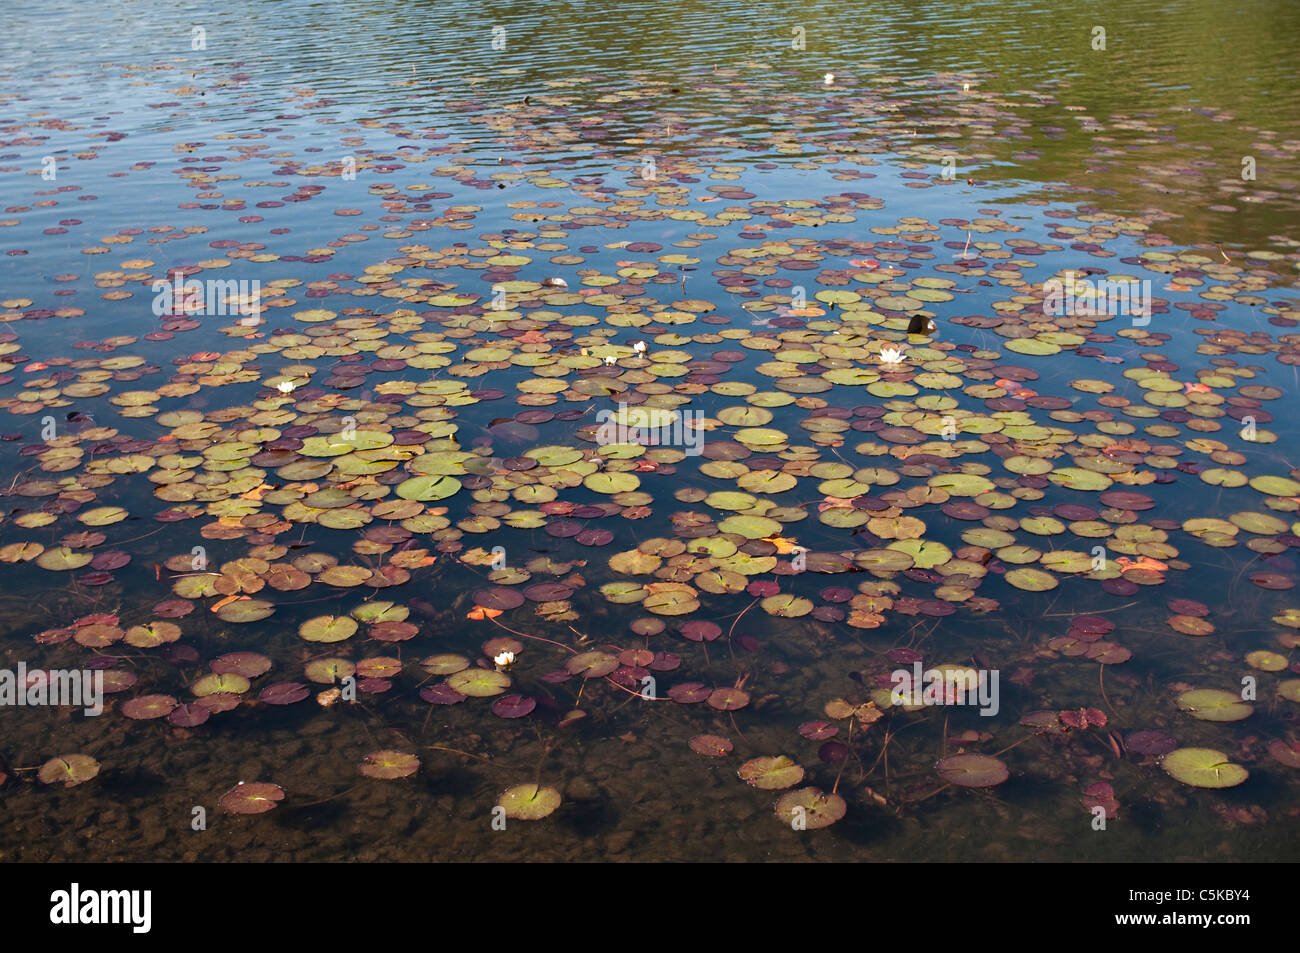 Lily pads on the surface of a lake in England. Stock Photo